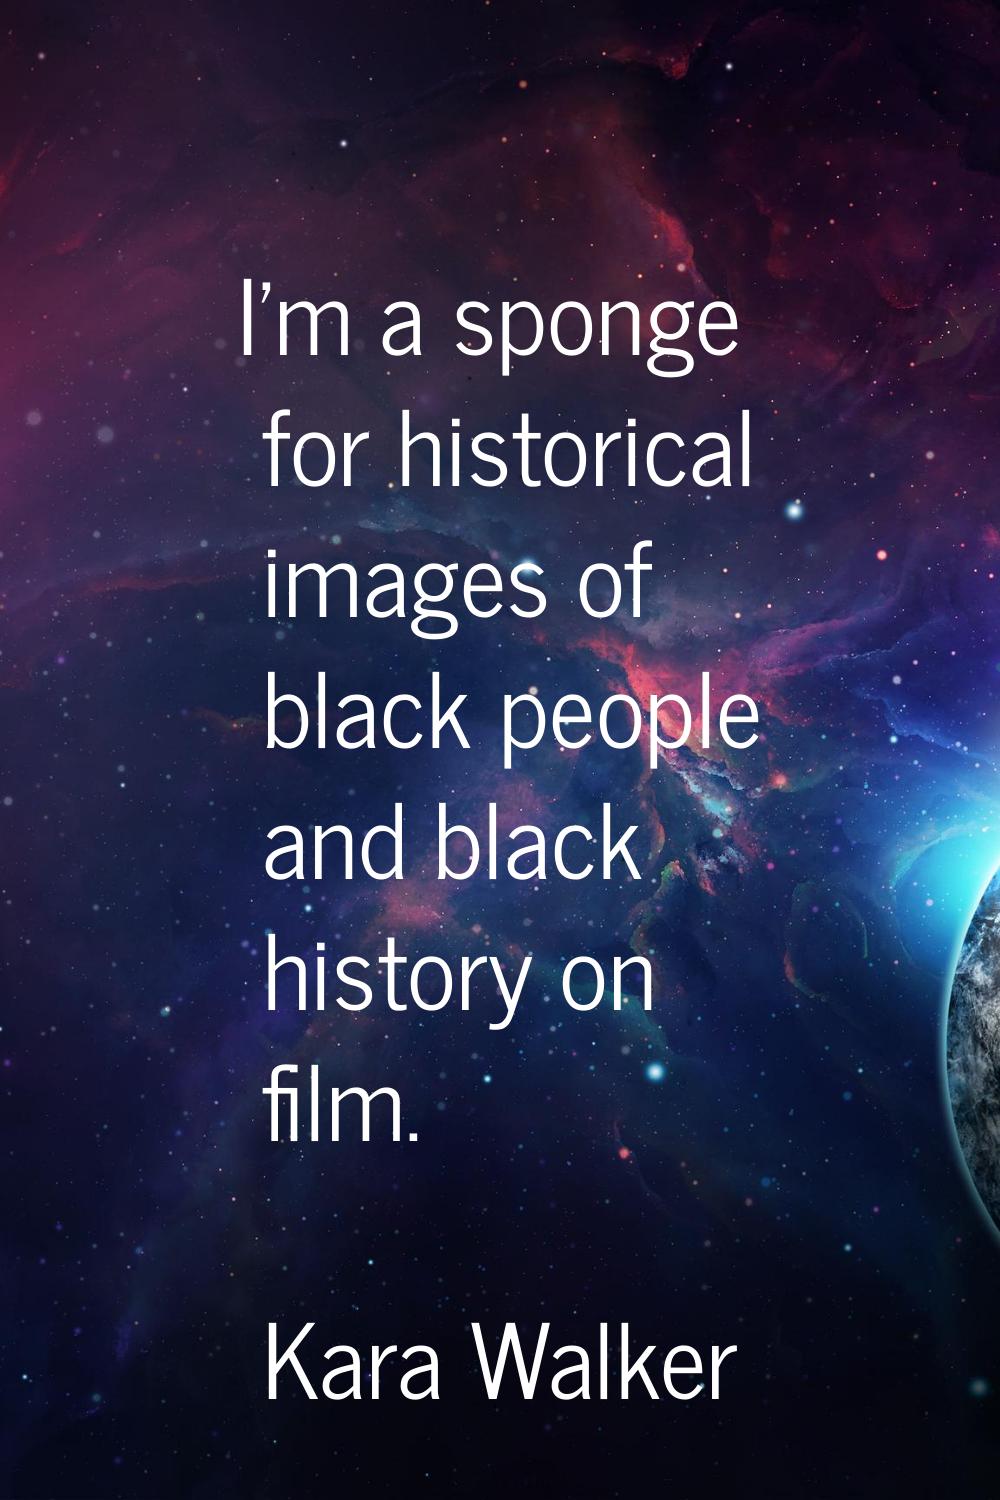 I'm a sponge for historical images of black people and black history on film.